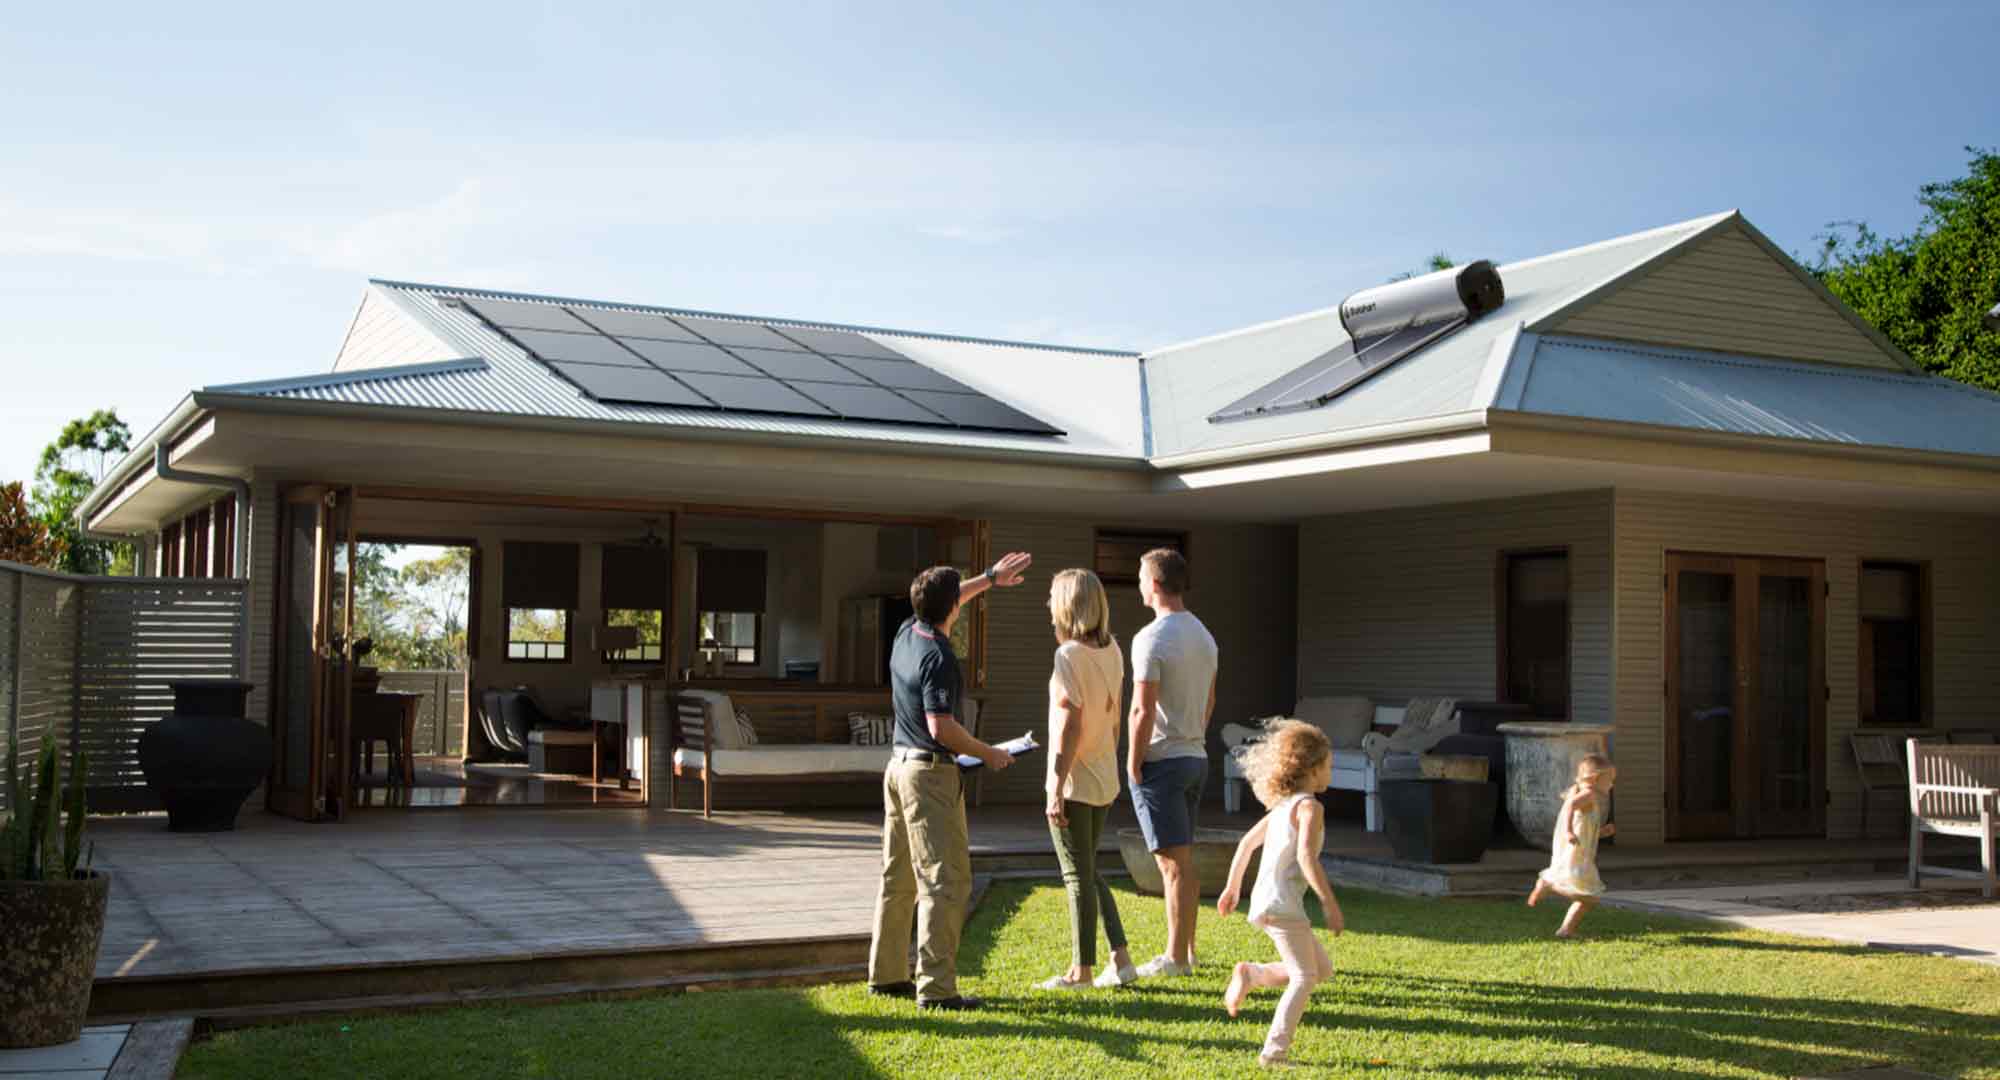 Solahart solar assessment with family and house